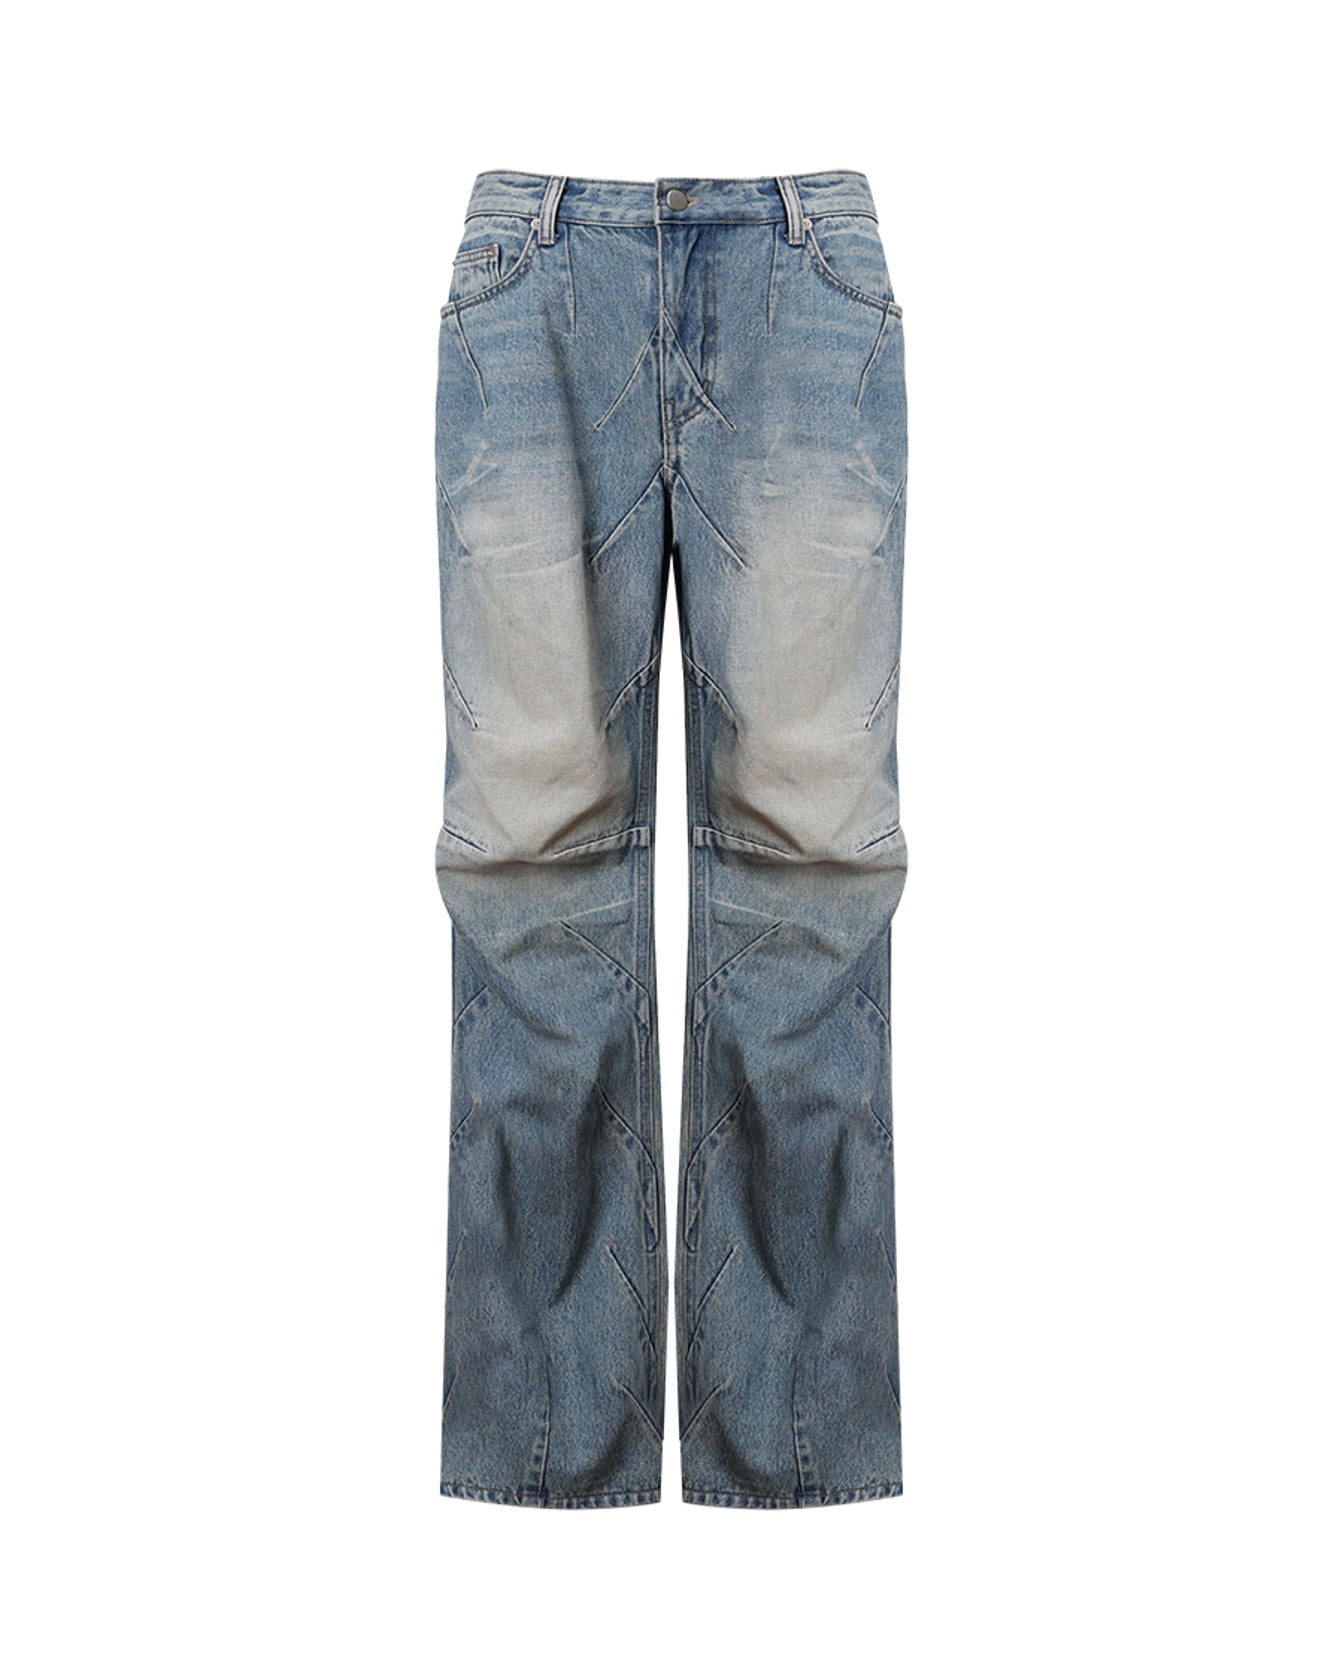 THORNS JEANS (Washed blue)